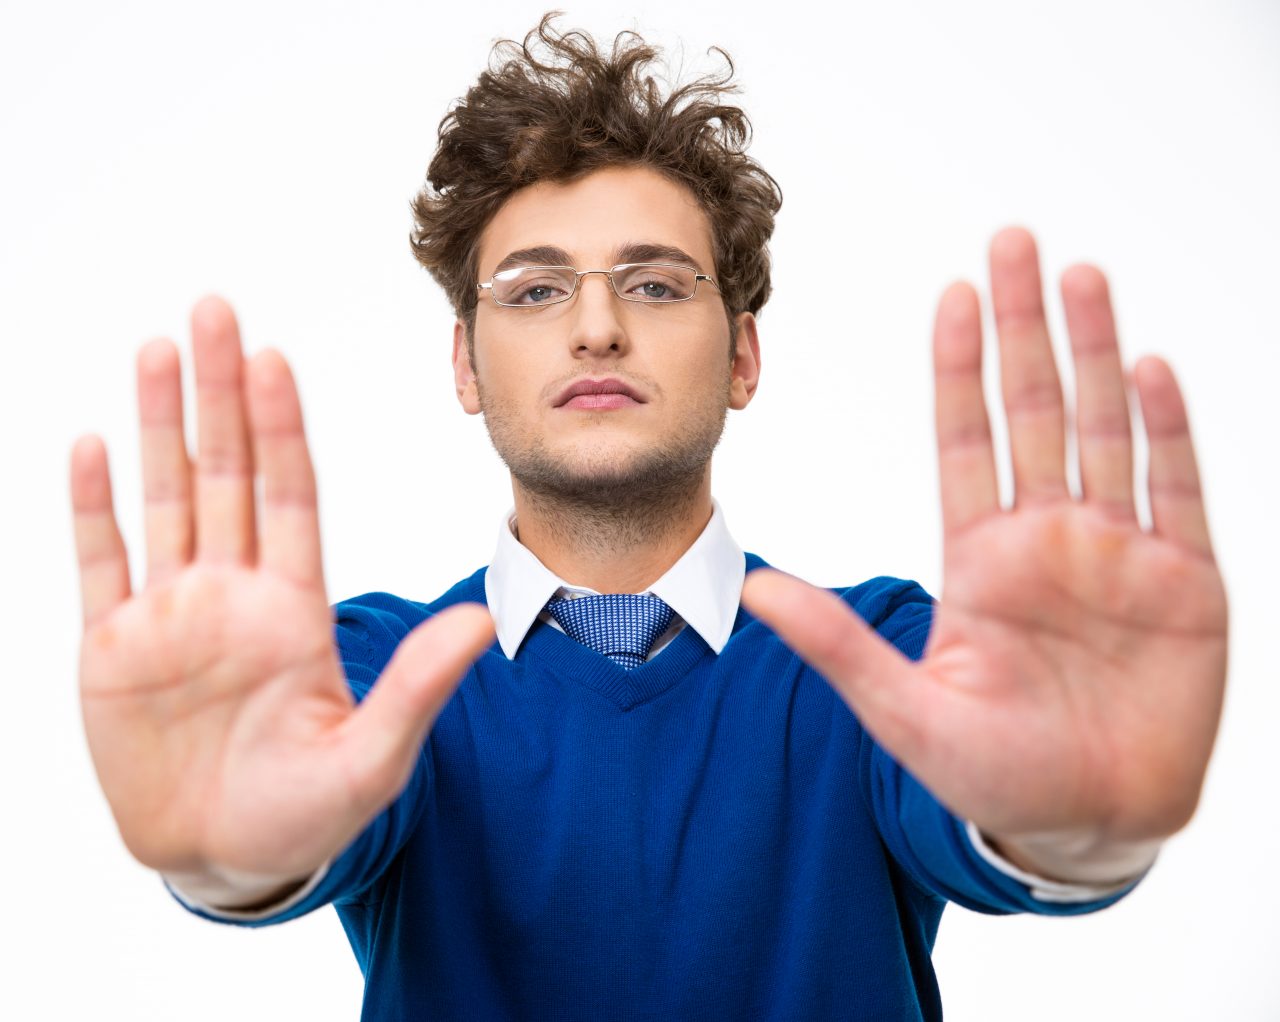 Confident business man showing stop gesture over white background